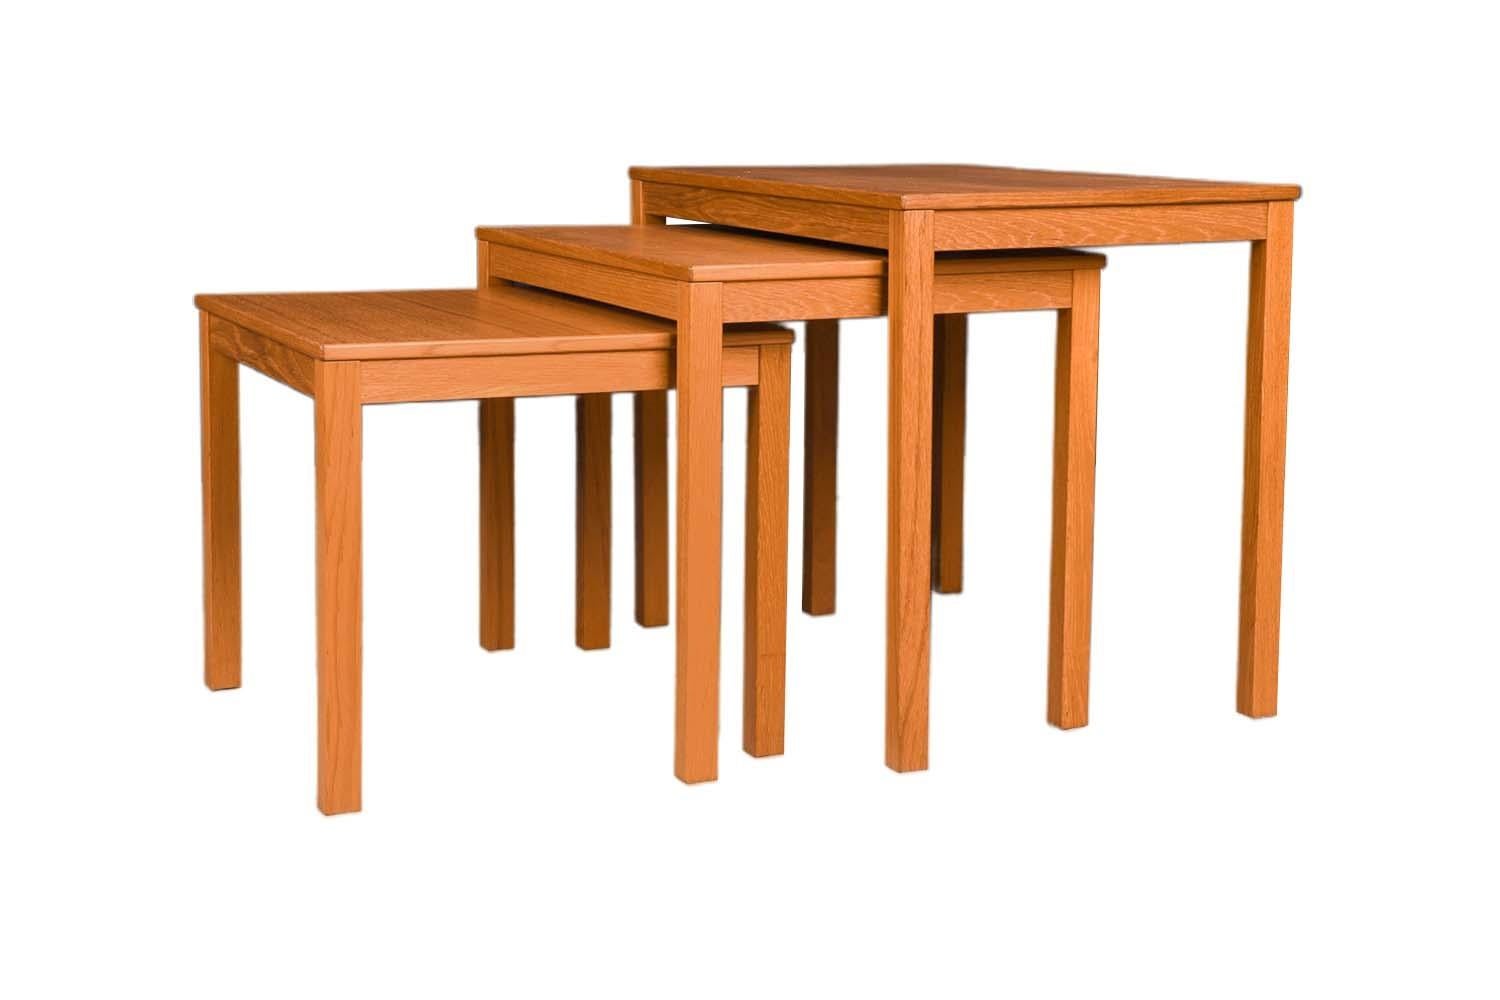 Set of three Mid-Century Modern teak, rectangular nesting tables. Exceptionally well crafted. Undersides of the tables are channeled so that the tables hook to one another when nested, forming an attractive profile. The wood grain is naturally